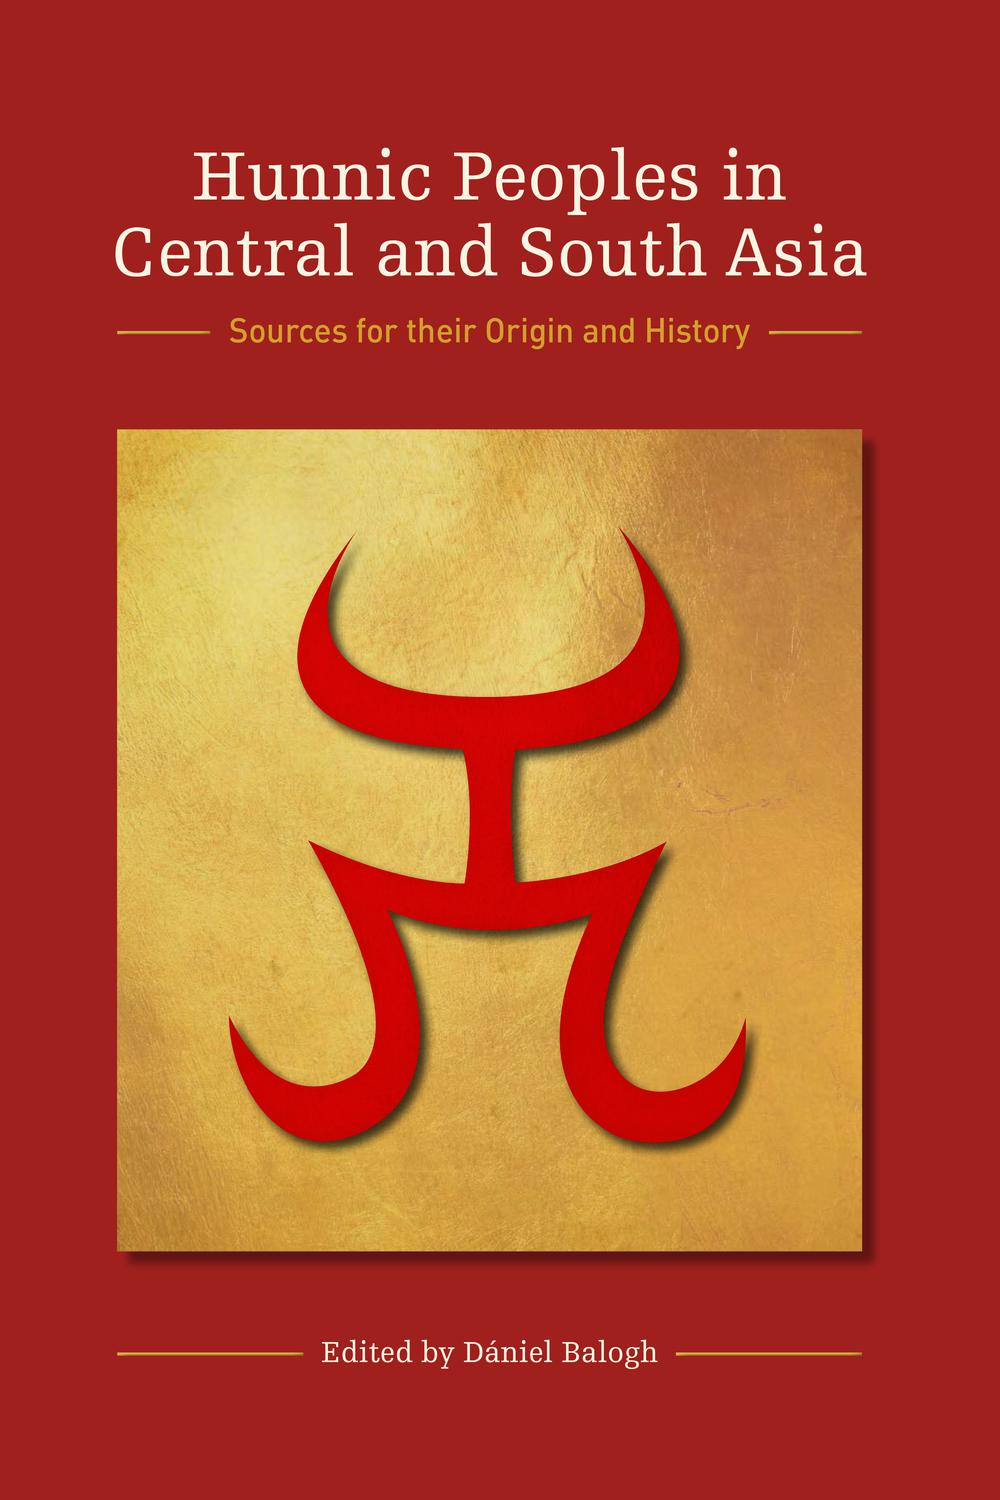 Hunnic Peoples in Central and South Asia